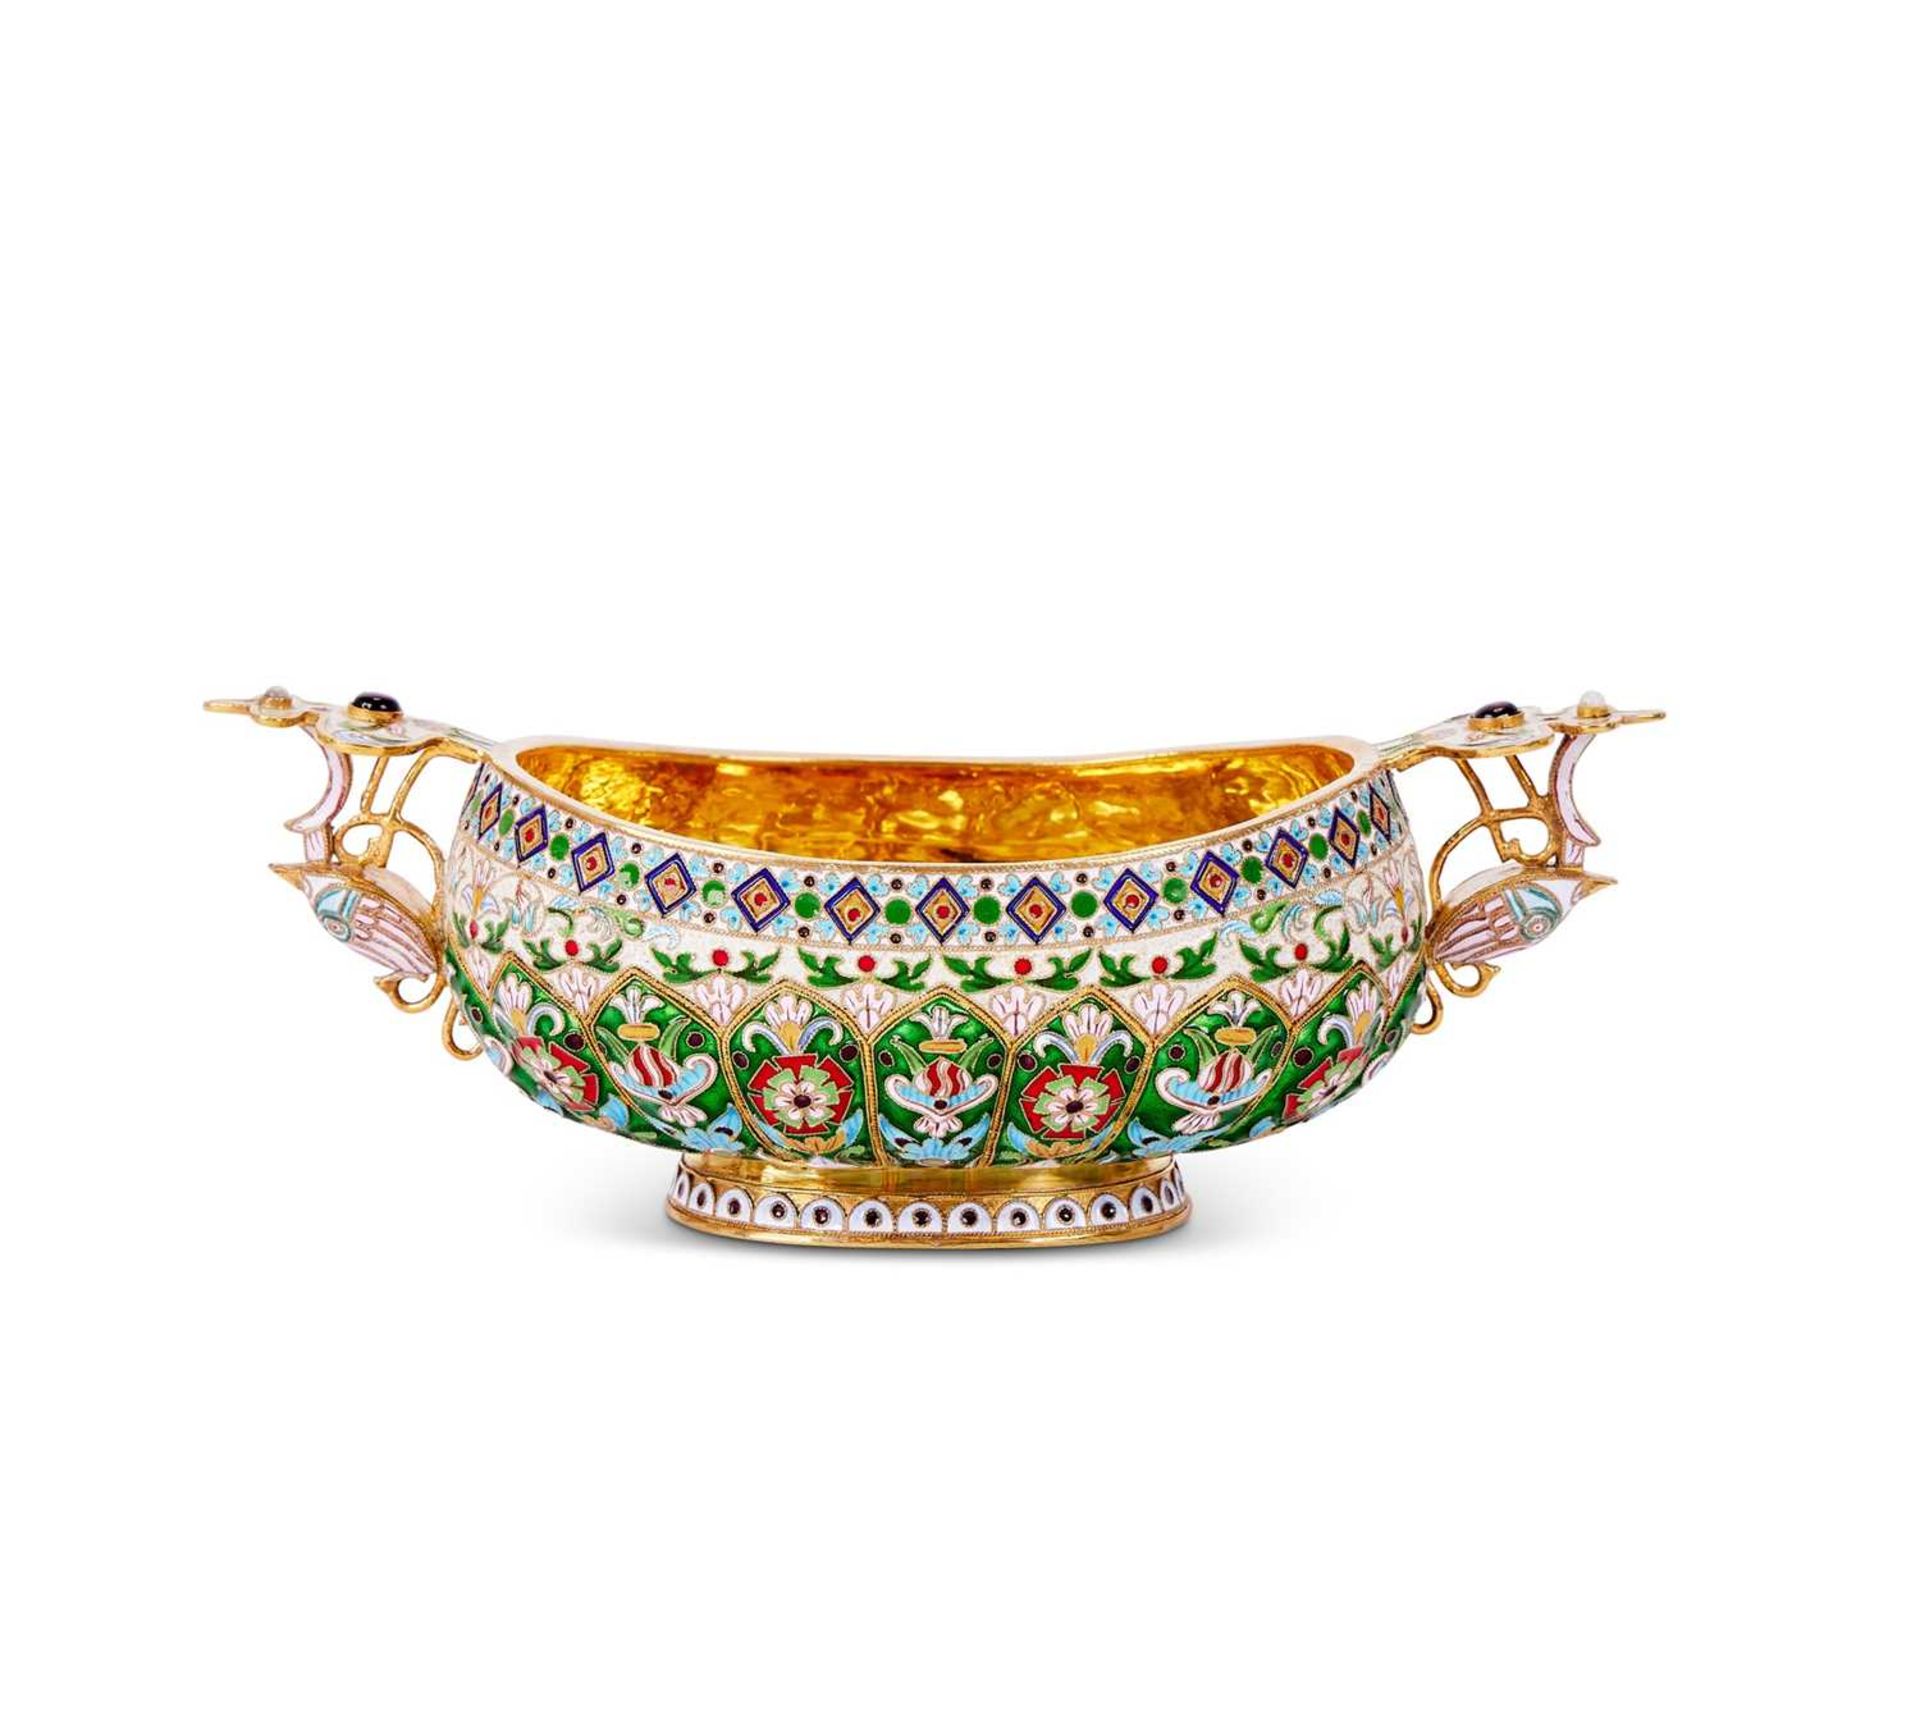 A SILVER GILT, ENAMEL AND GEM SET RUSSIAN STYLE KOVSH - Image 2 of 4